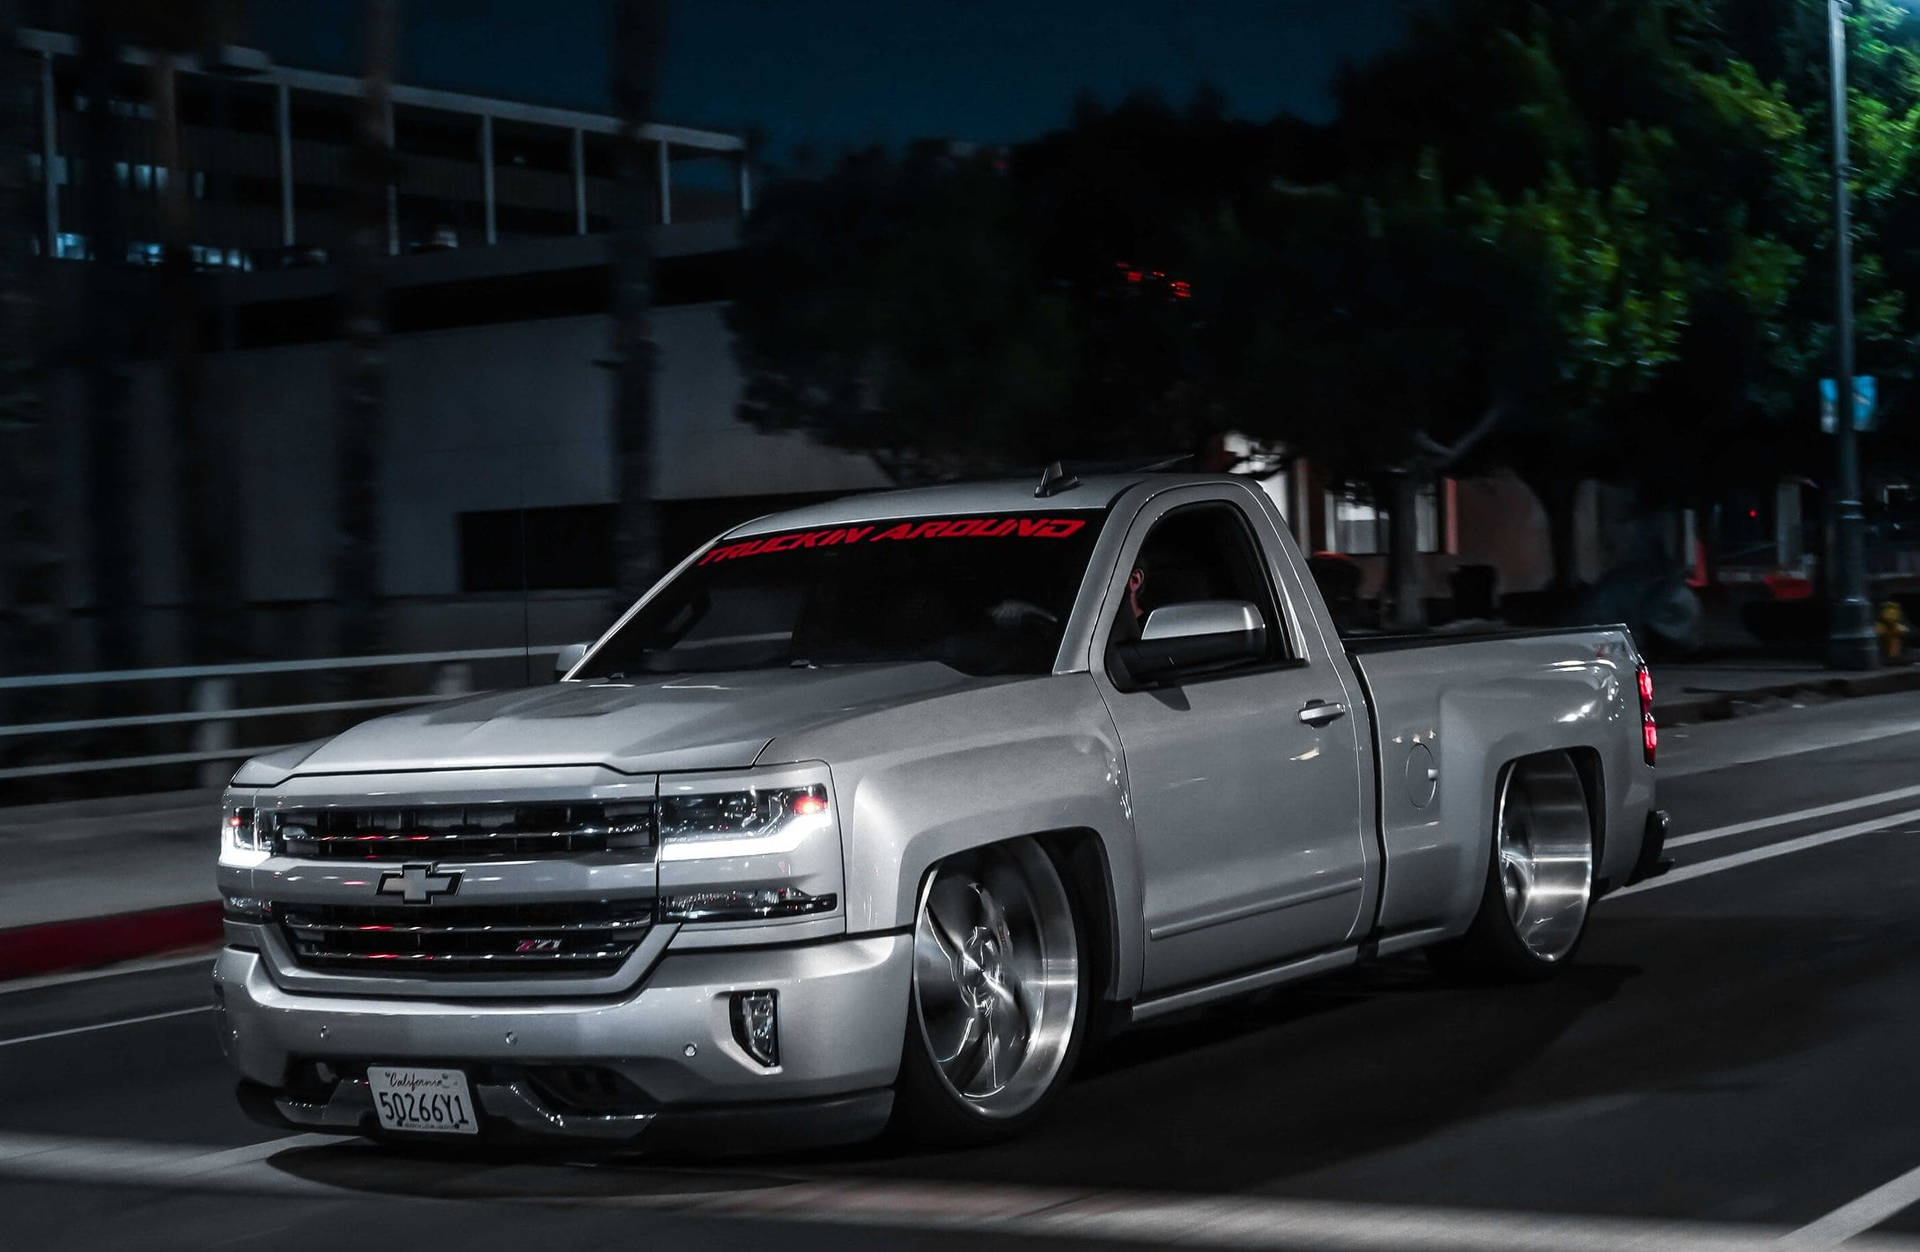 Download Dropped Truck At Night Wallpaper